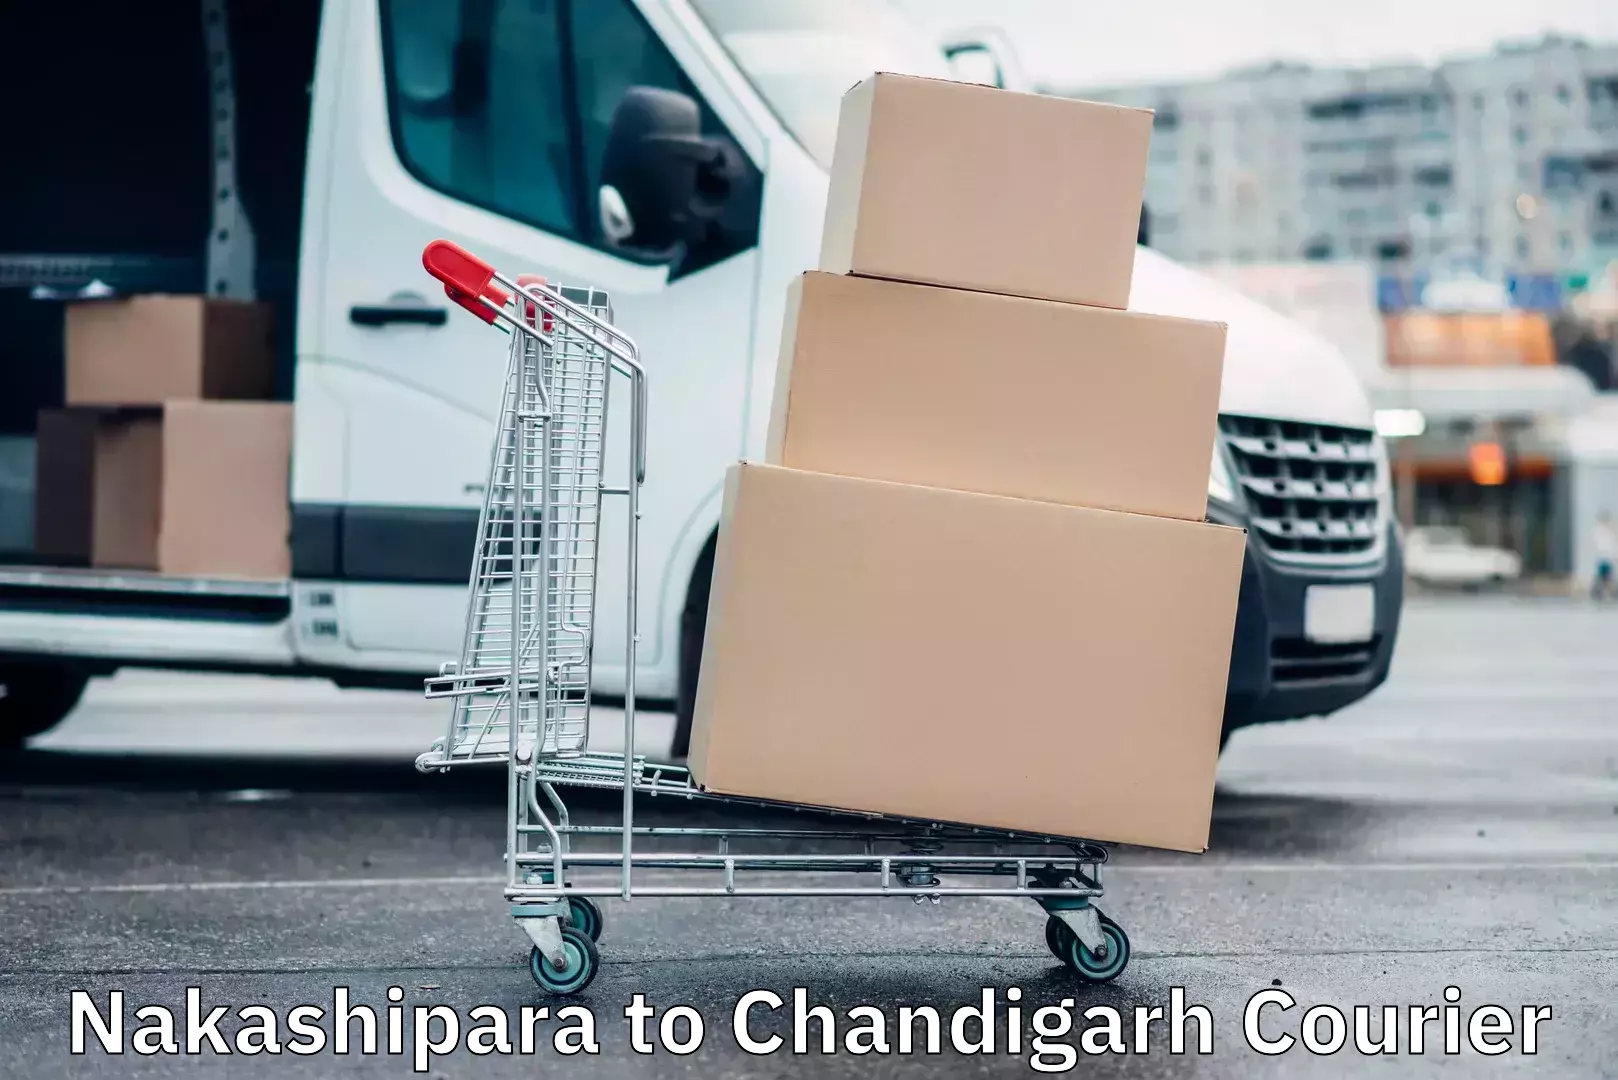 Air courier services Nakashipara to Chandigarh